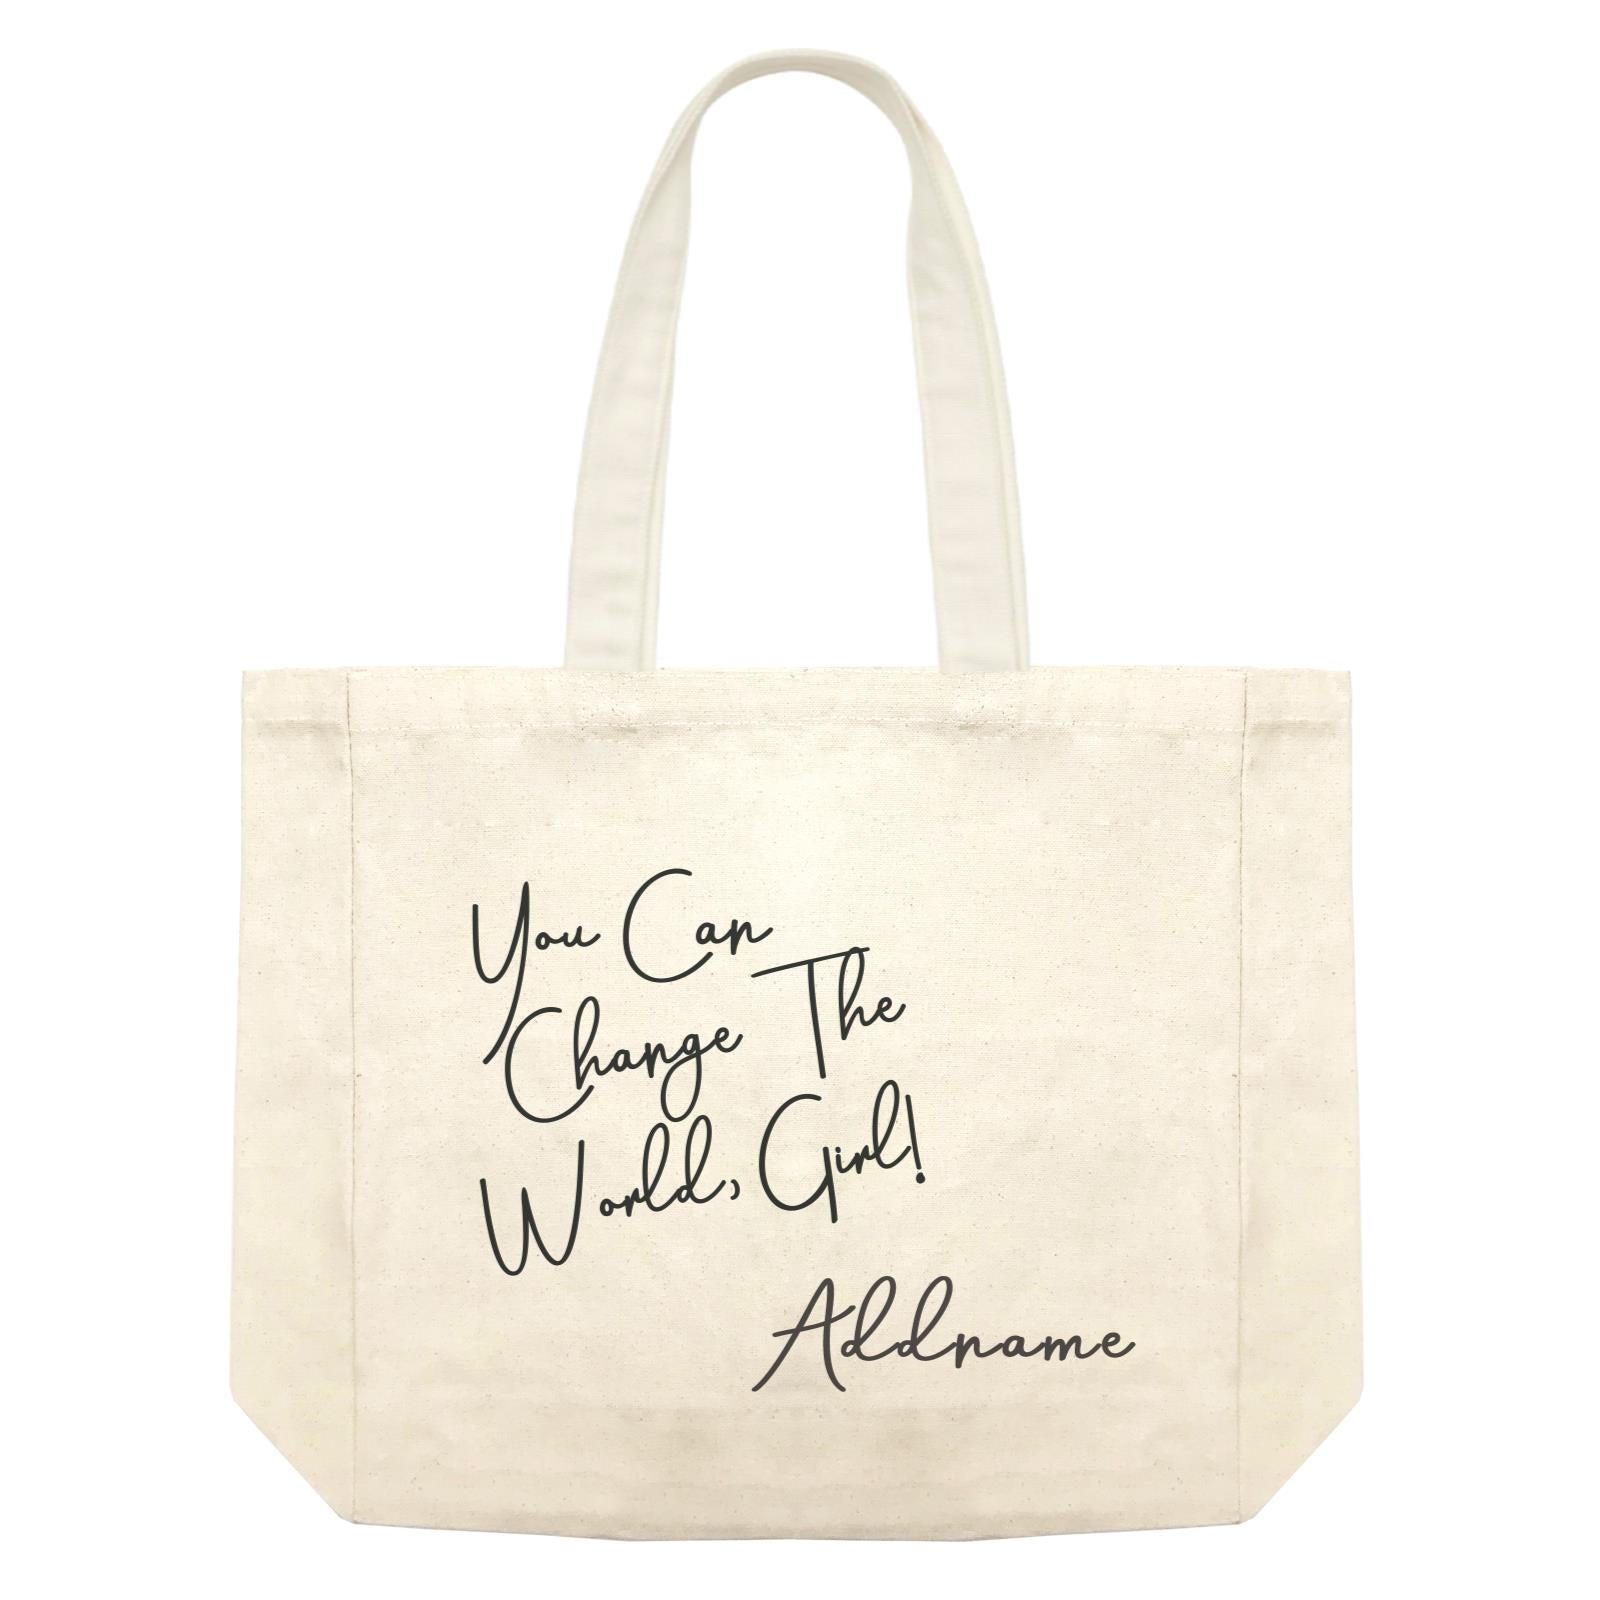 Girl Boss Quotes You Can Change The World Girl Addname Shopping Bag